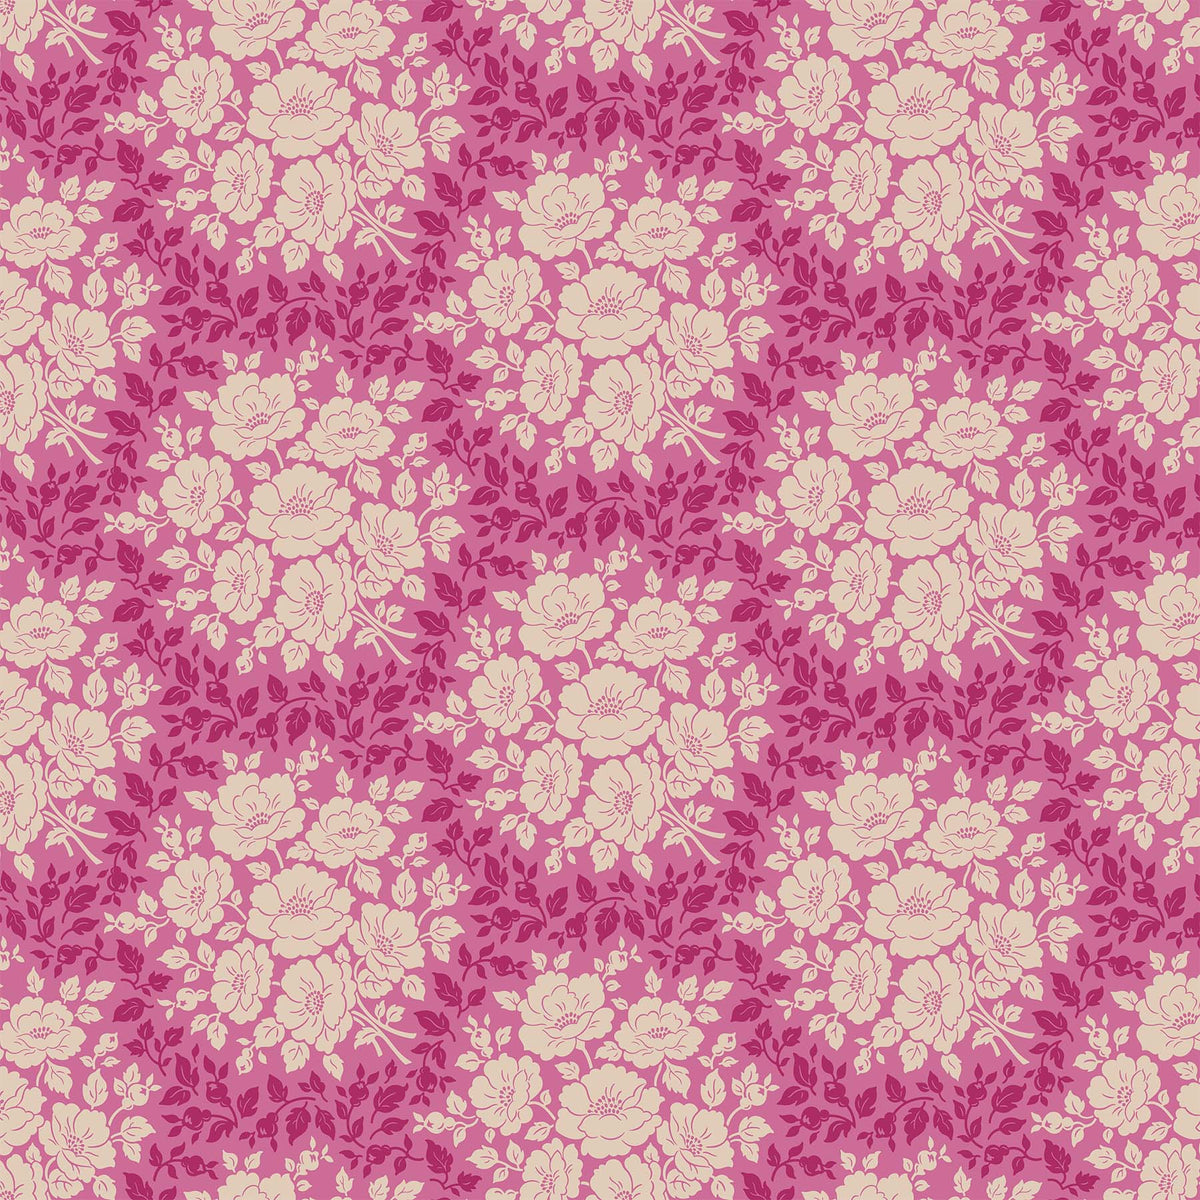 Local Honey Quilt Fabric - Morning Bloom on Violet Purple/Pink - 90659-28